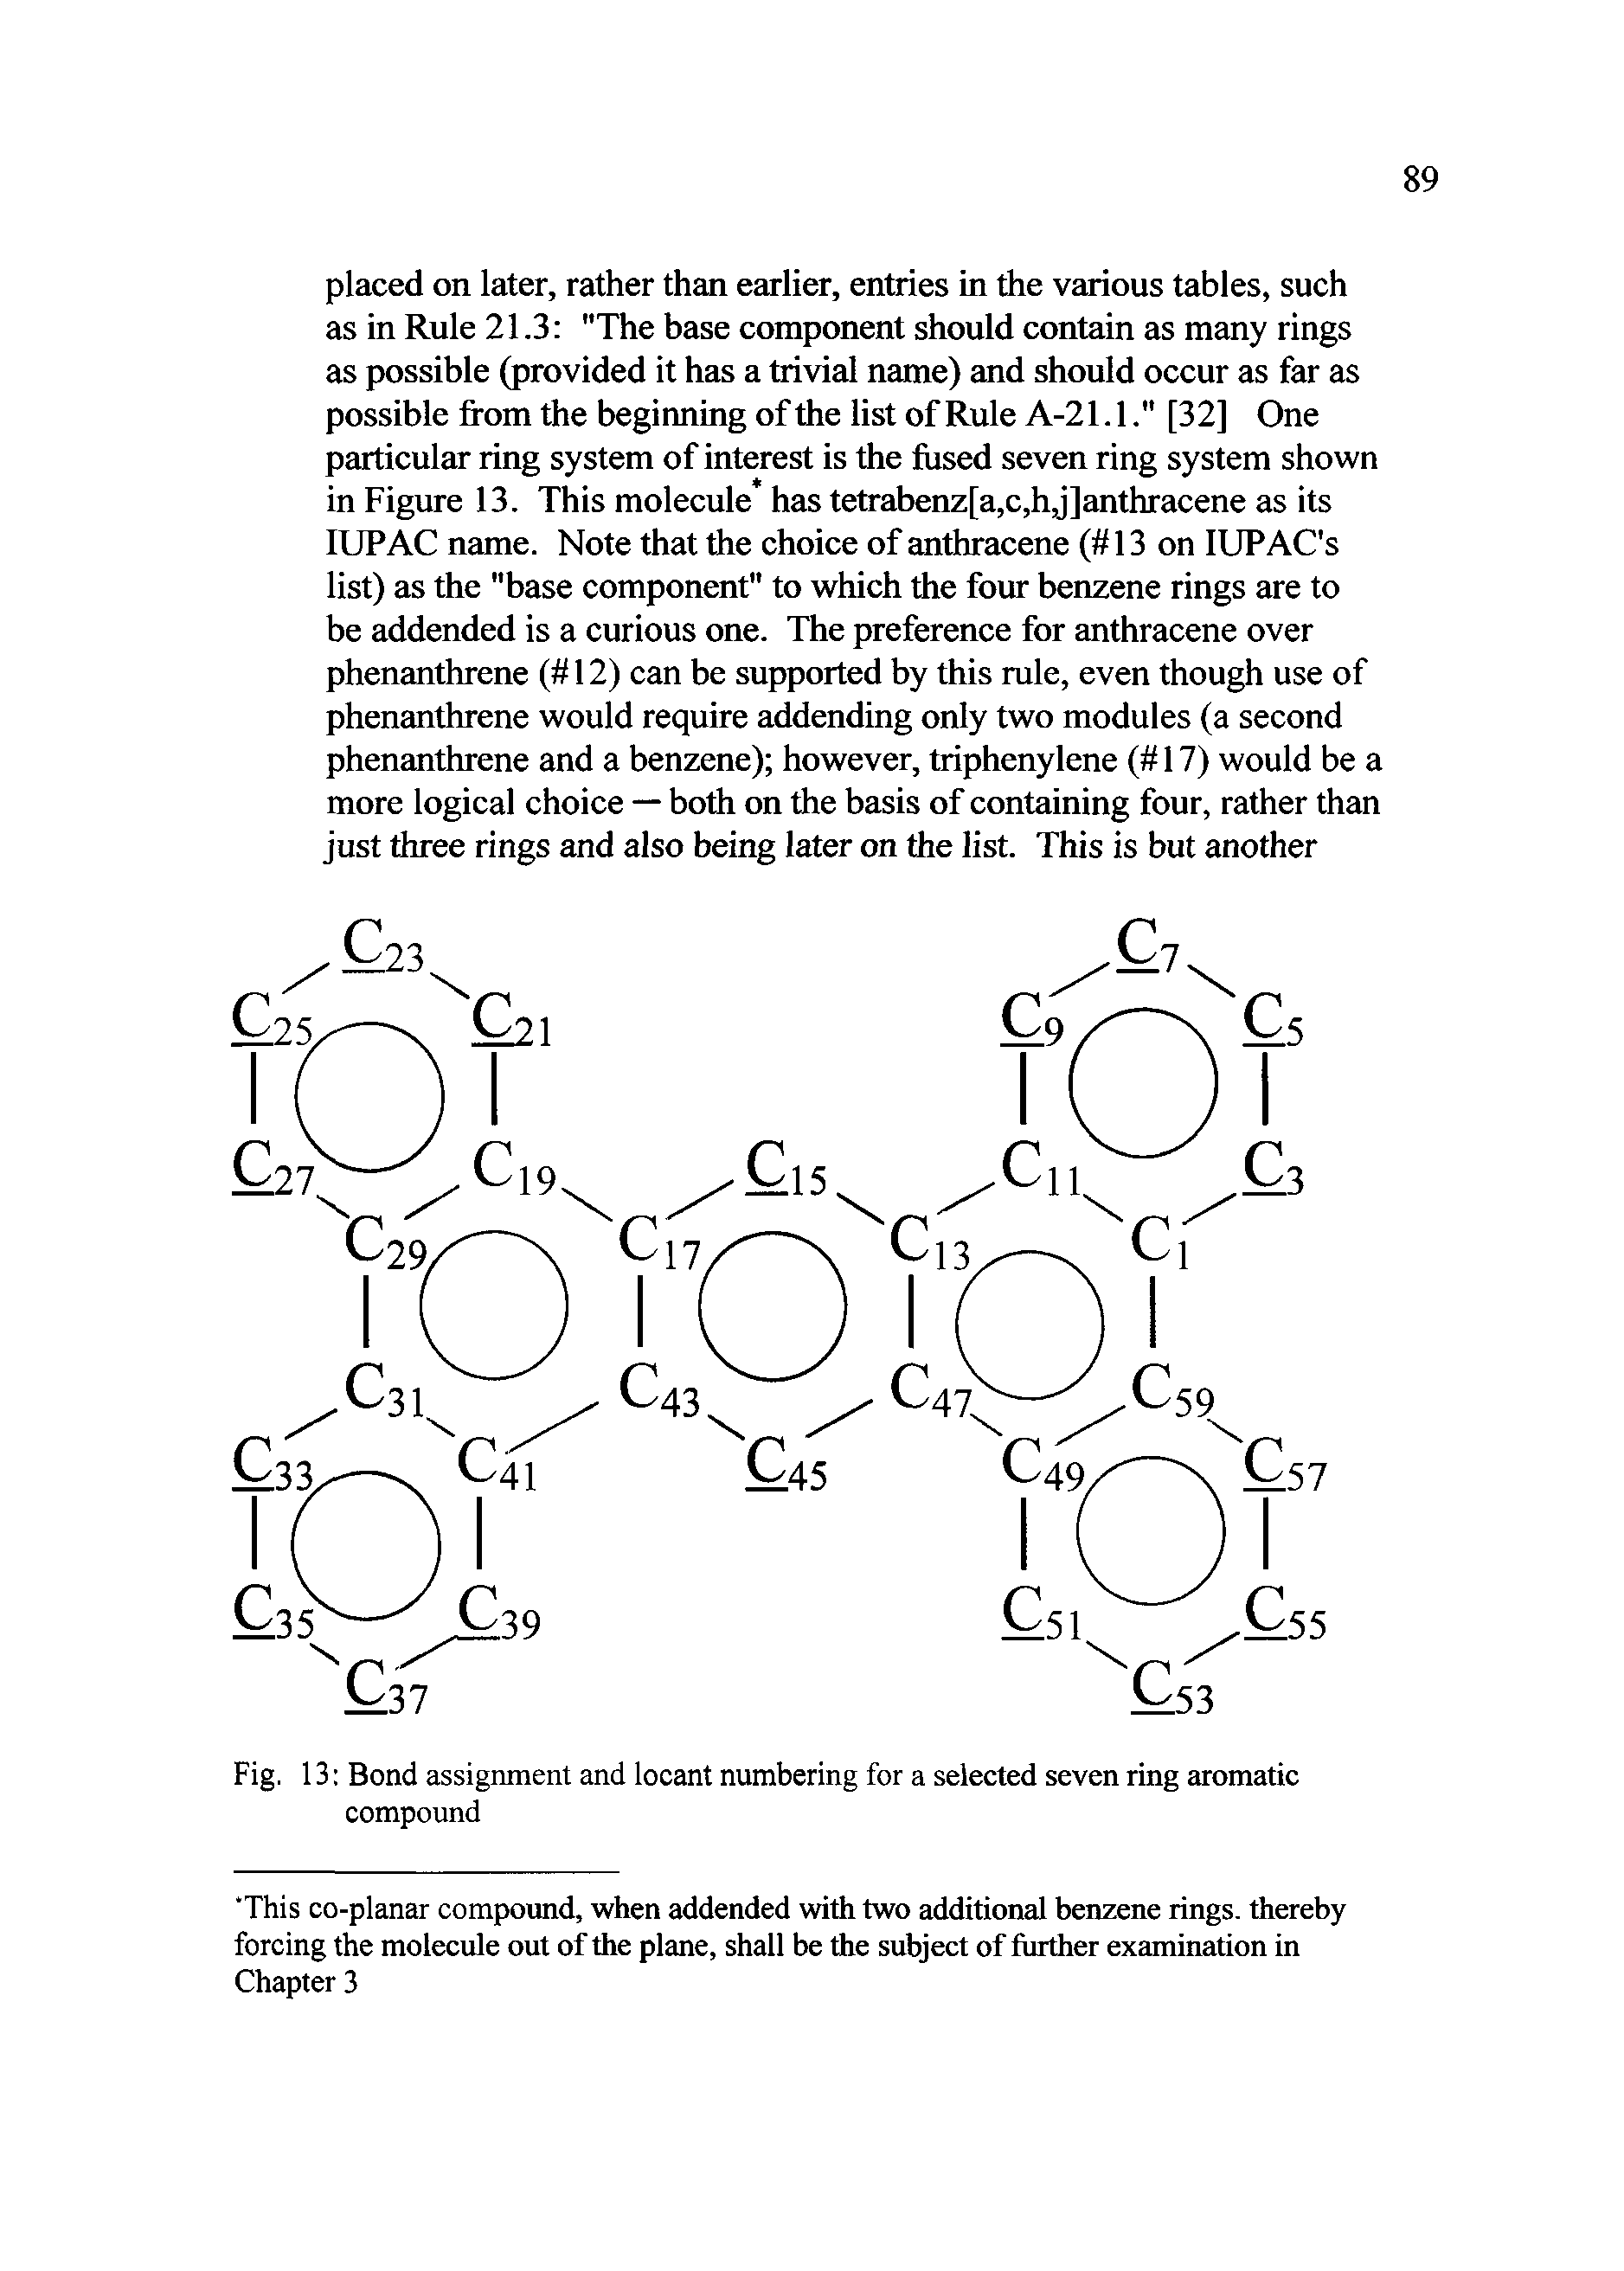 Fig. 13 Bond assignment and locant numbering for a selected seven ring aromatic compound...